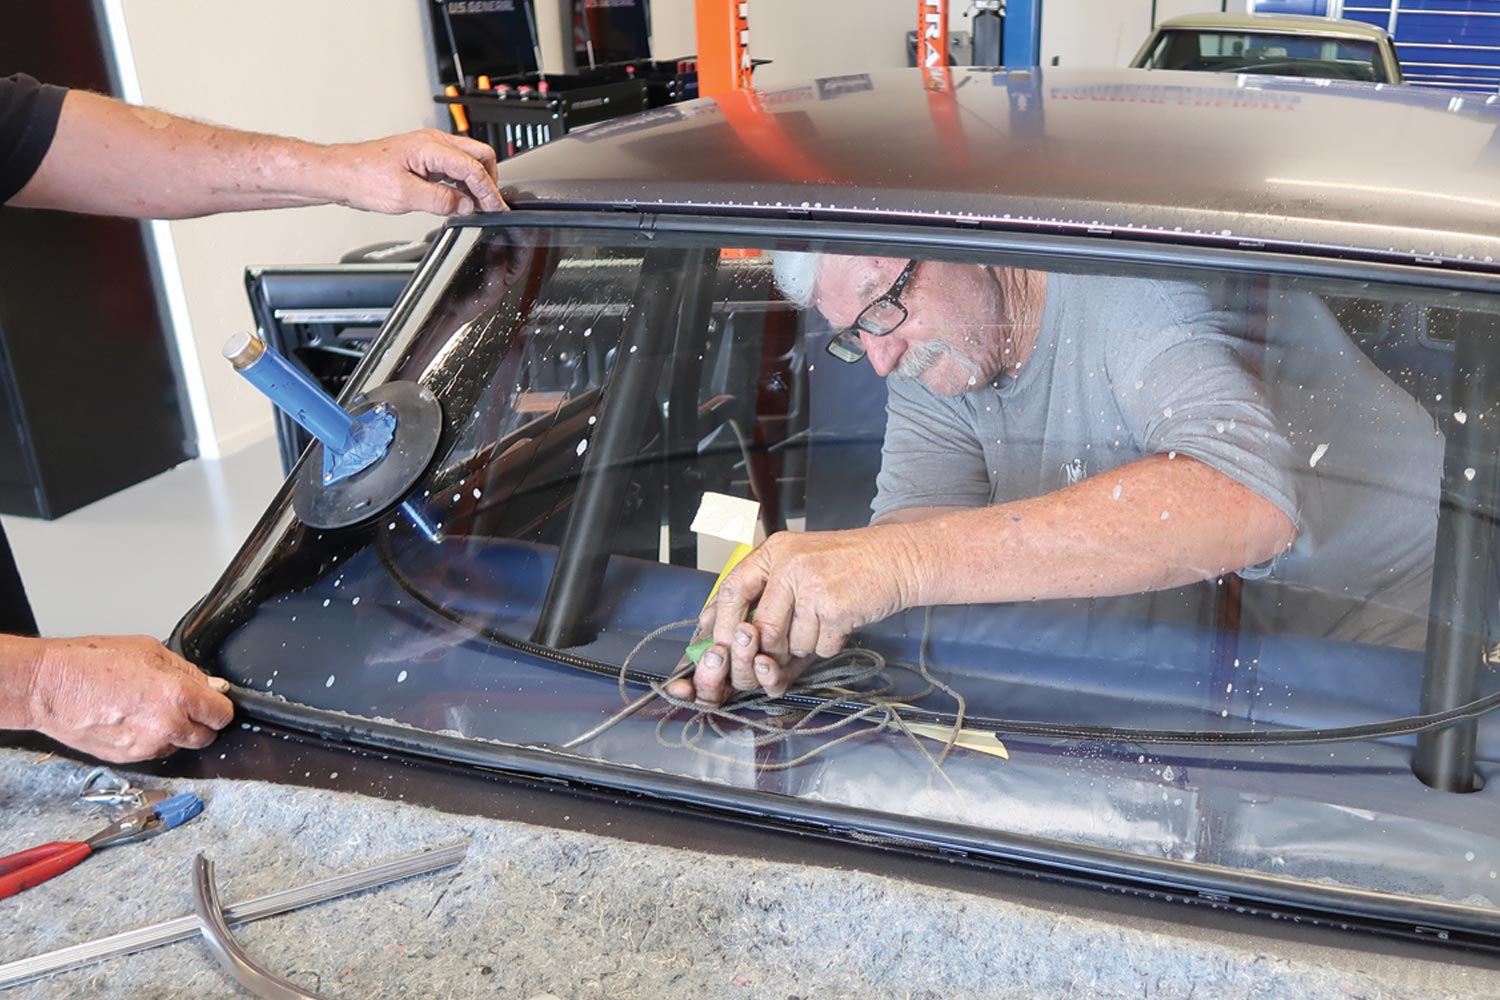 one of the two mechanics pulls the cord out of the gasket, a process often called “roping in” the glass